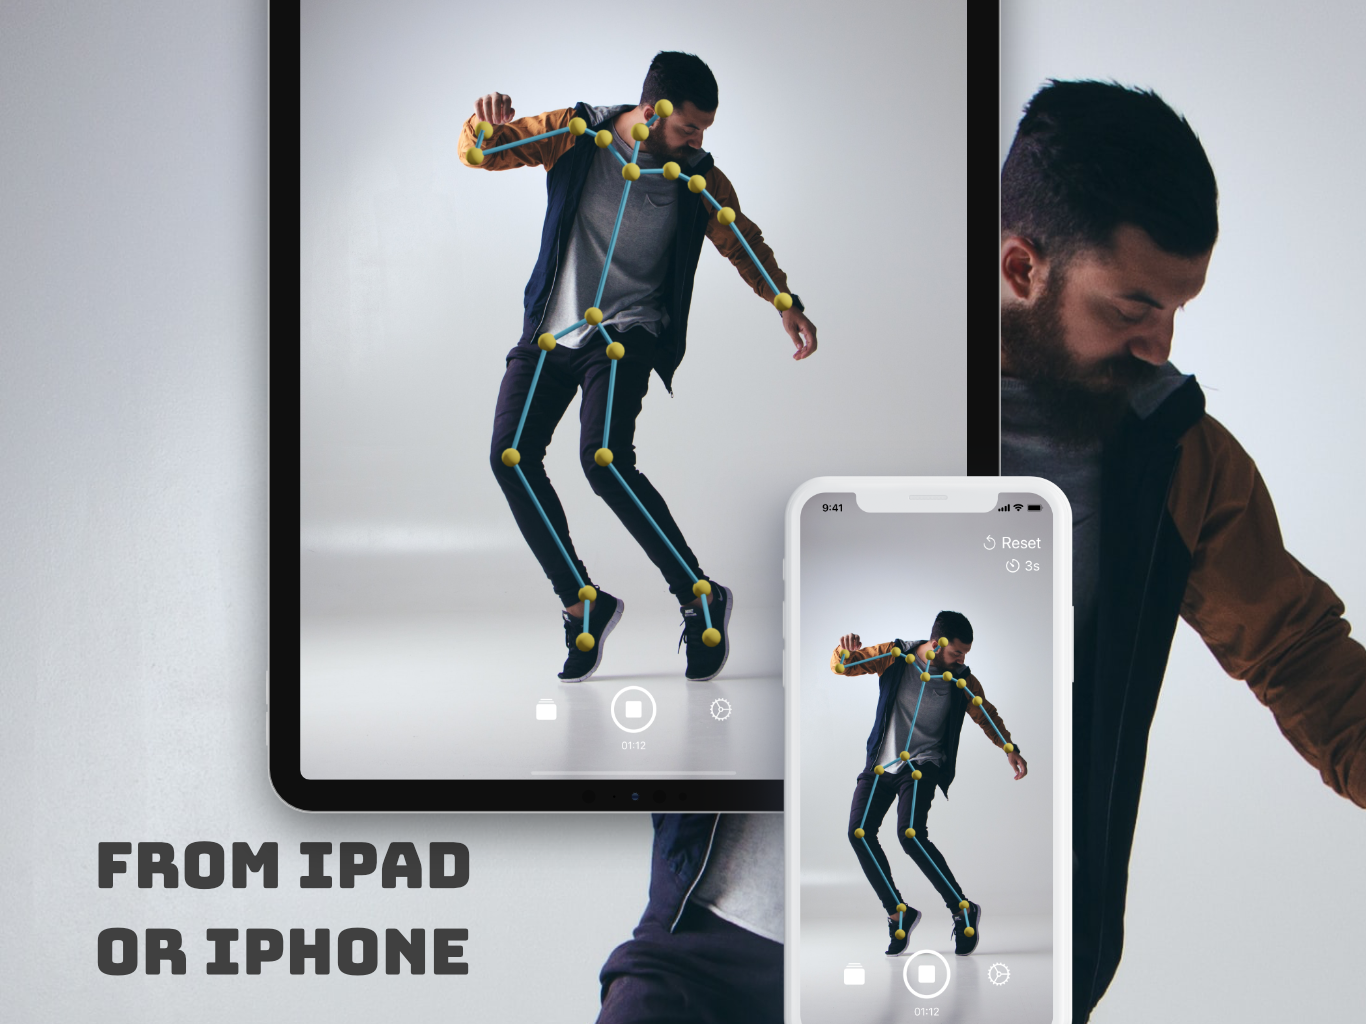 Your motion capture studio in iPad or iPhone